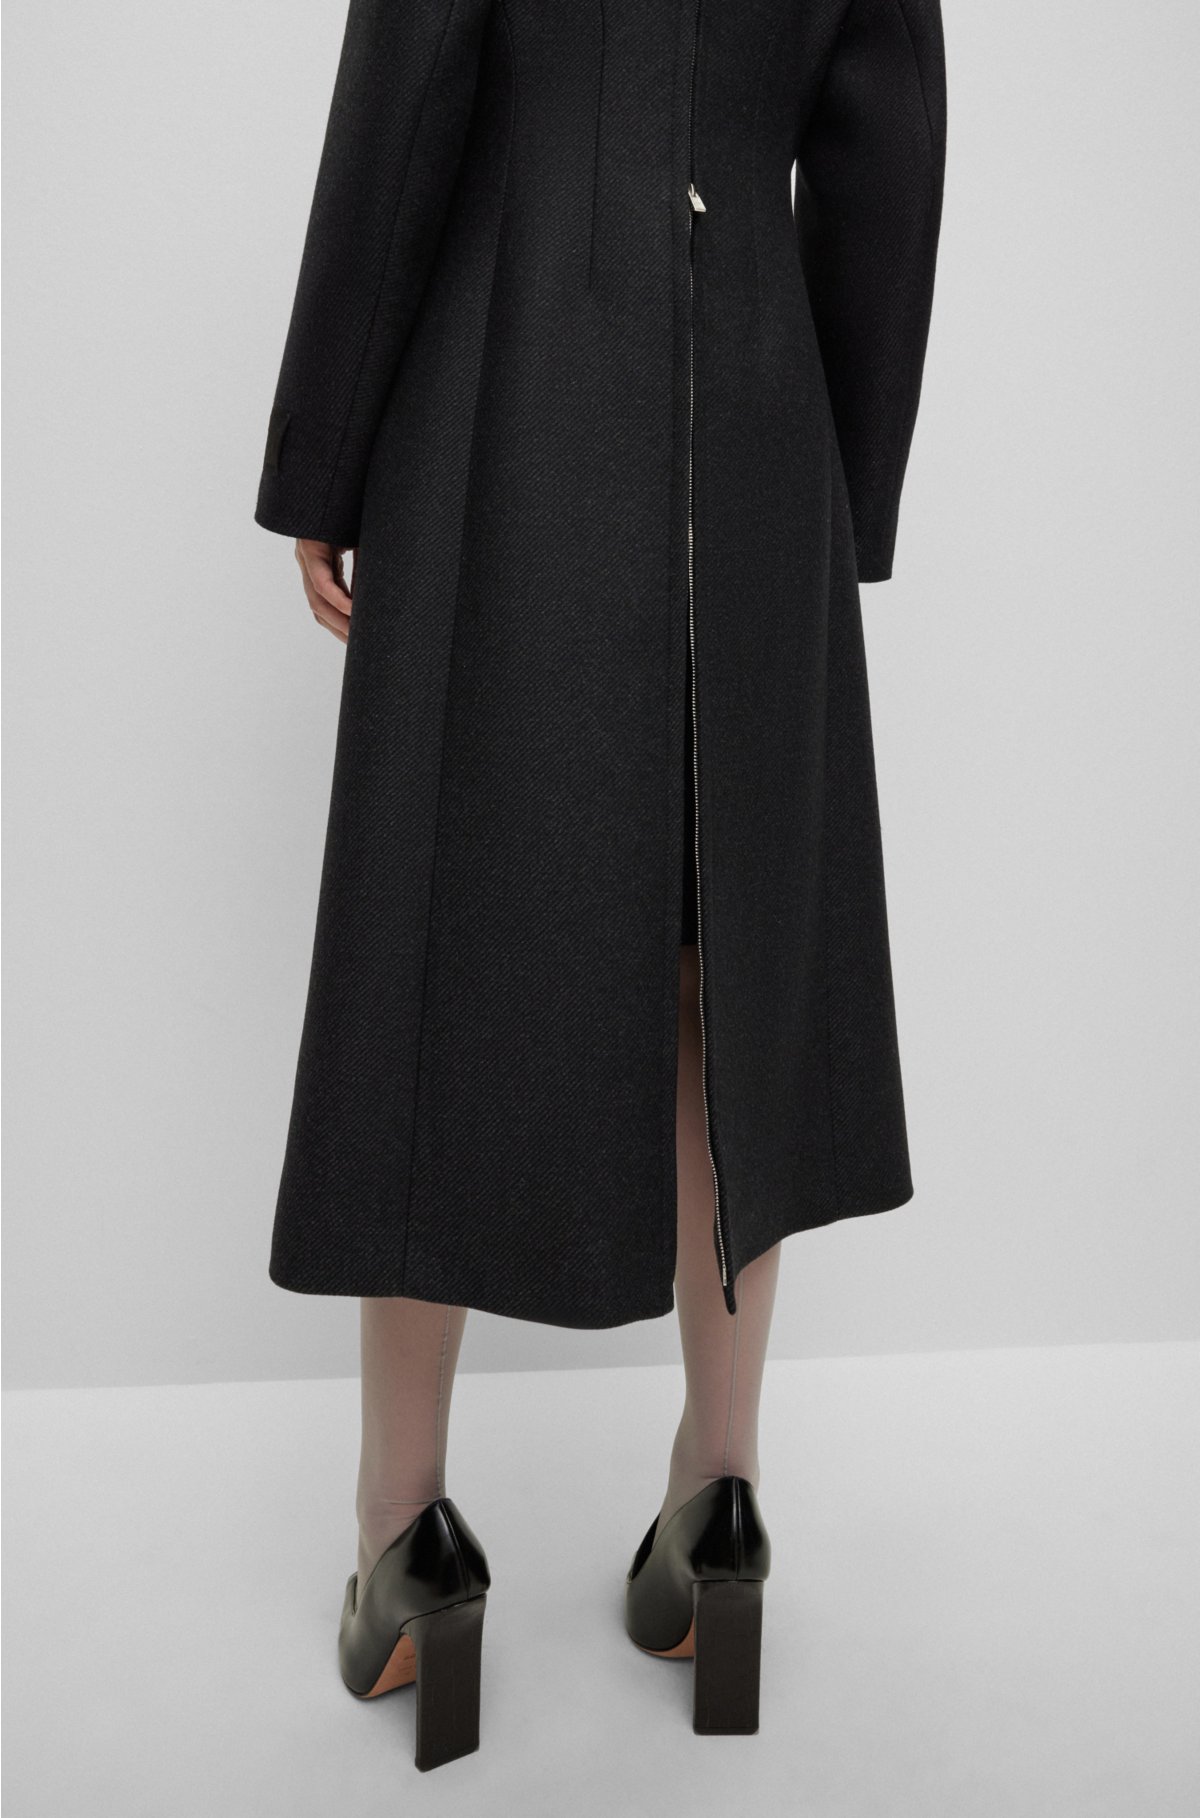 BOSS - Wool-blend tailored coat with back zip detail